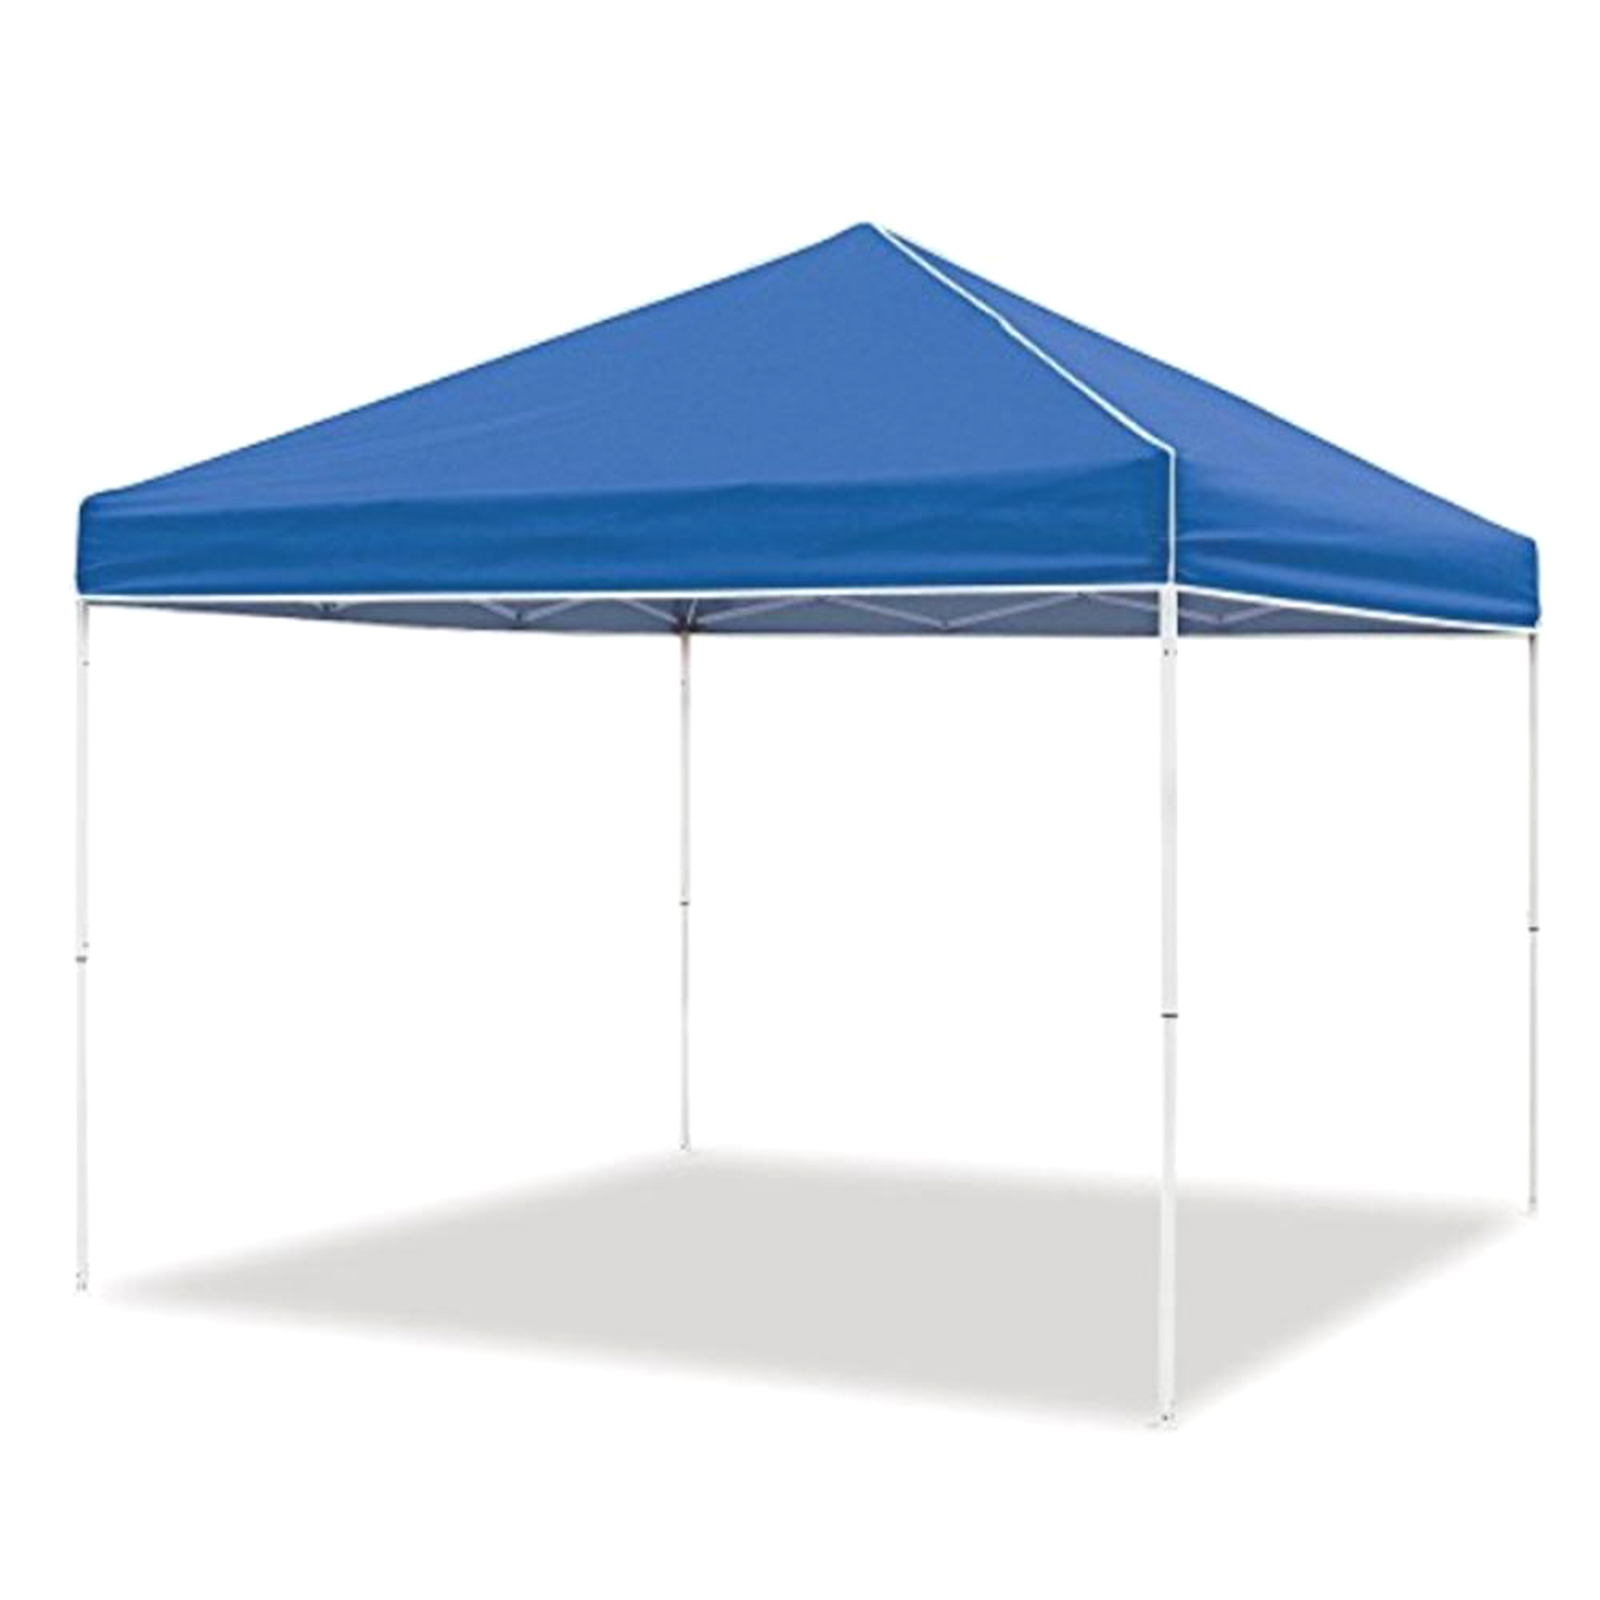 Z-Shade 10' Everest Instant Canopy Outdoor Camping Patio Shelter